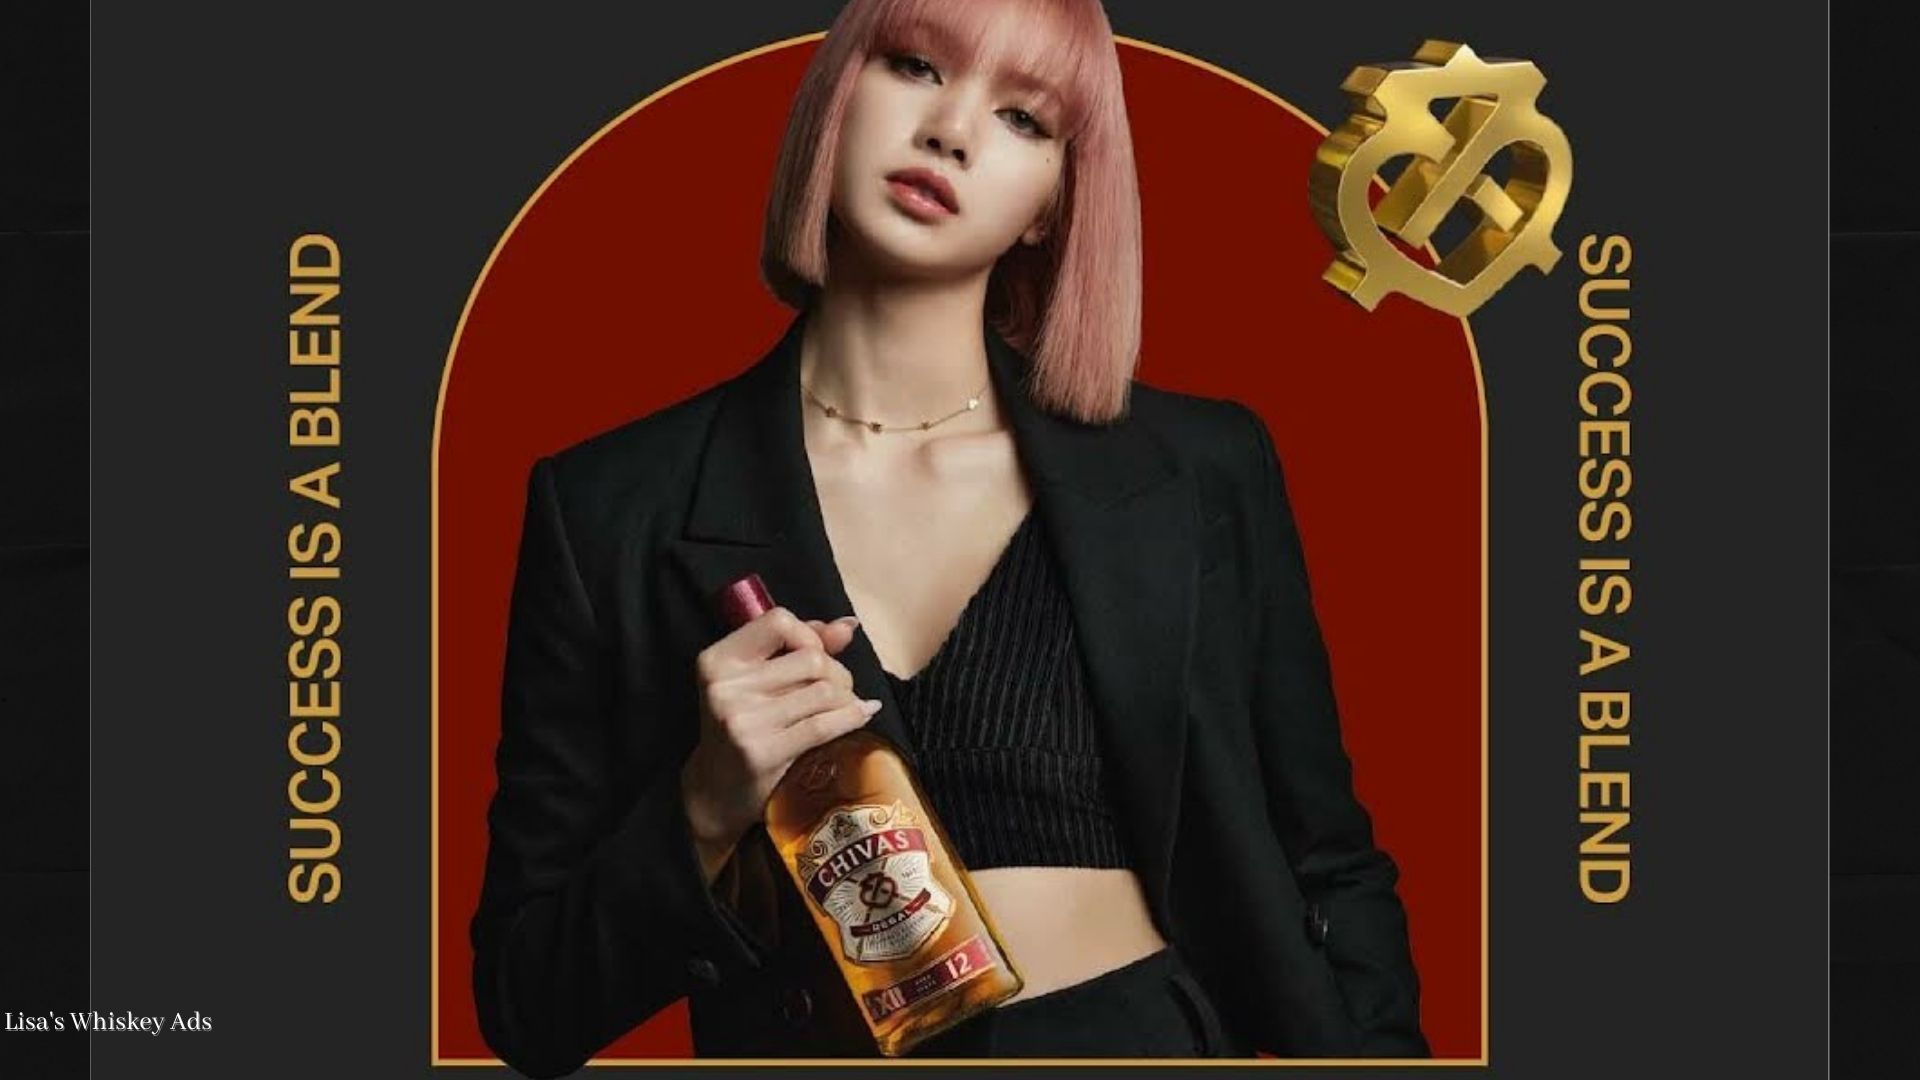 Lisa’s Whiskey Ads – Thailand Government Officials on Alert Regarding Any Marketing of The Same